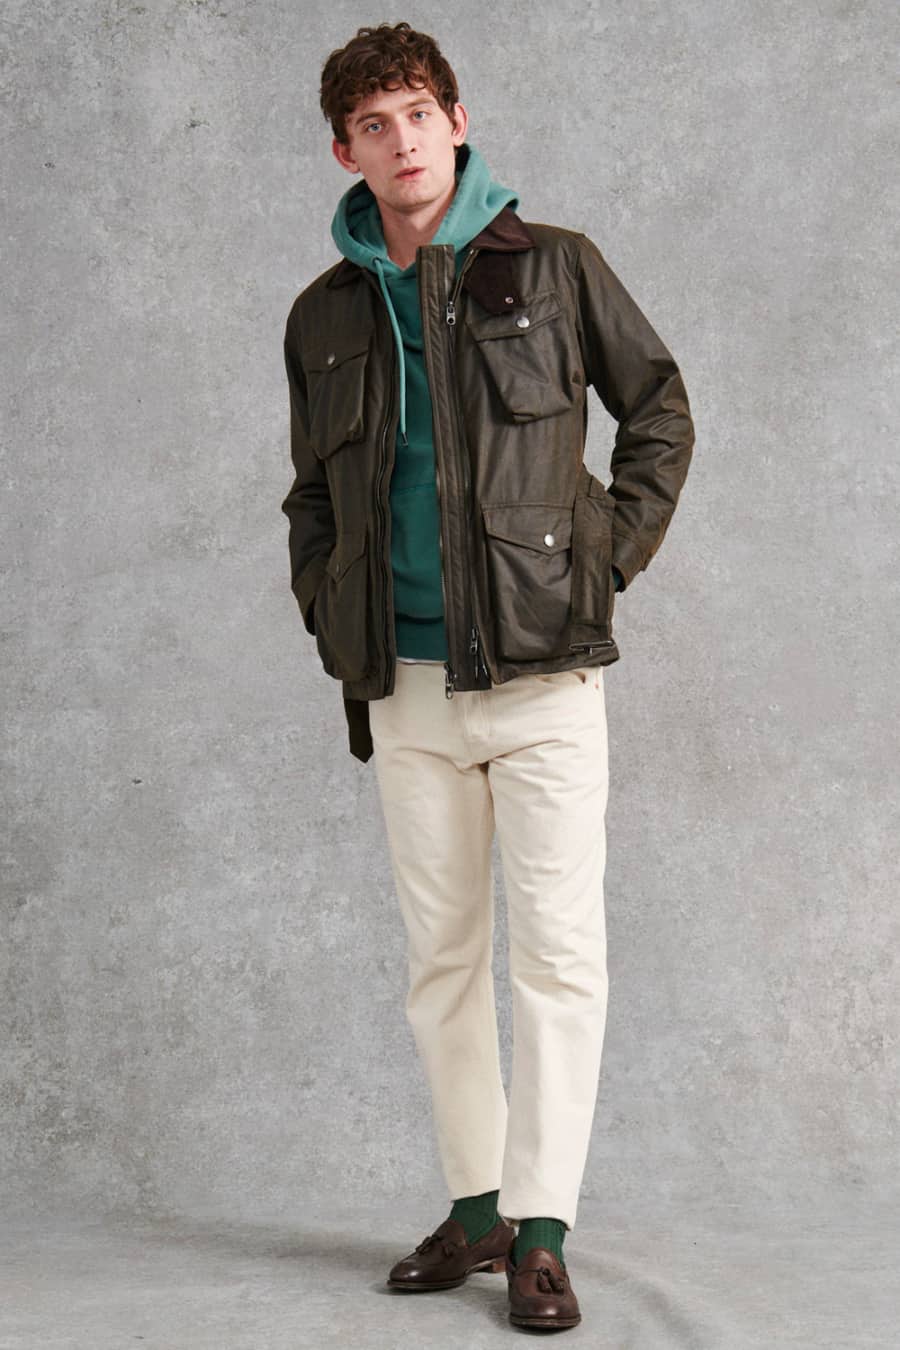 Men's white jeans, green hoodie, brown waxed jacket and brown tassel loafers outfit